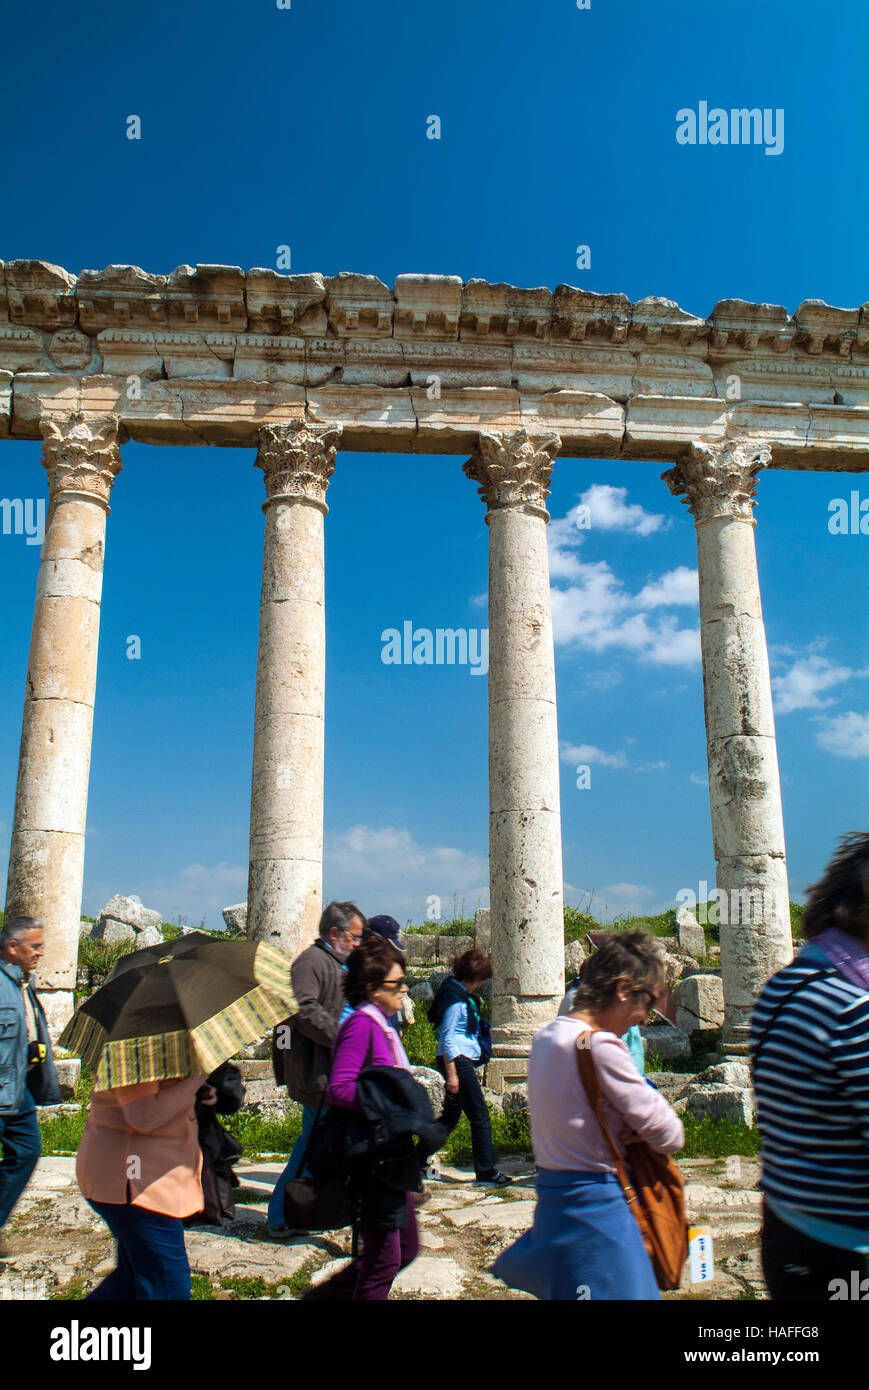 The Great Colonnade, built by the Romans in the 2nd century AD, at the ancient city of Apamea near Hama in Syria. Stock Photo